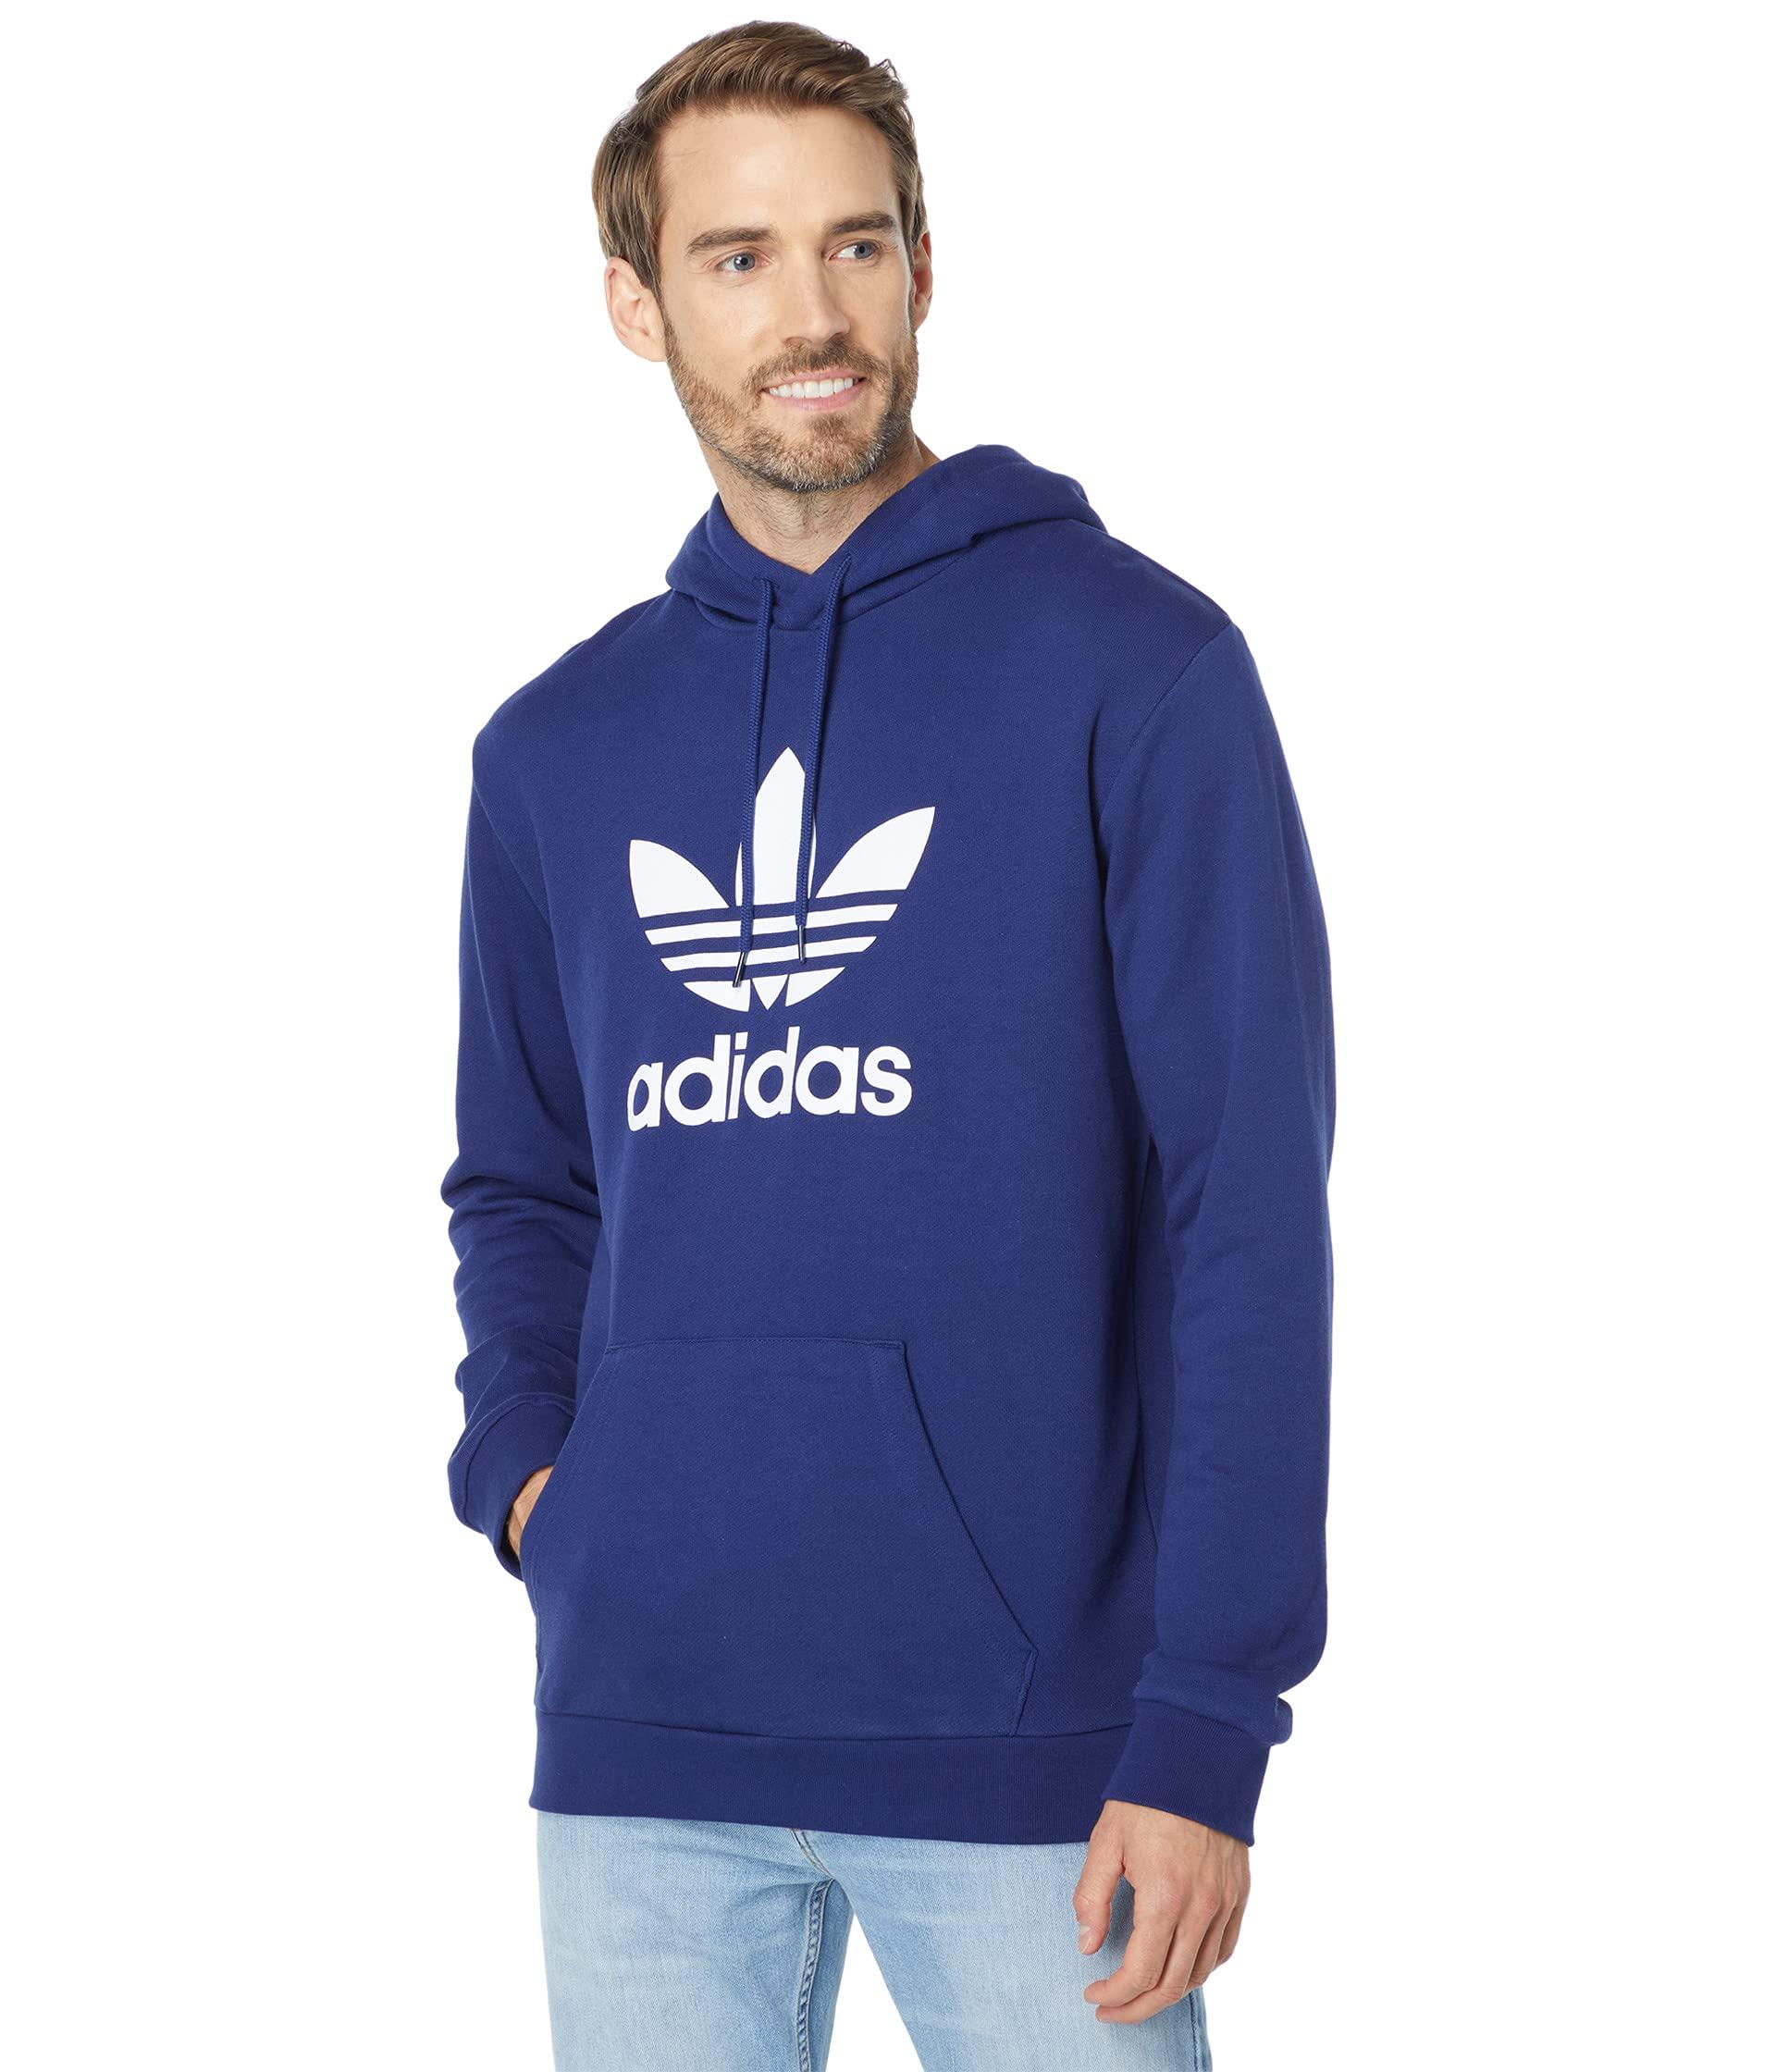 deeply extract Mission adidas hoodie blau earthquake Goat Spit out